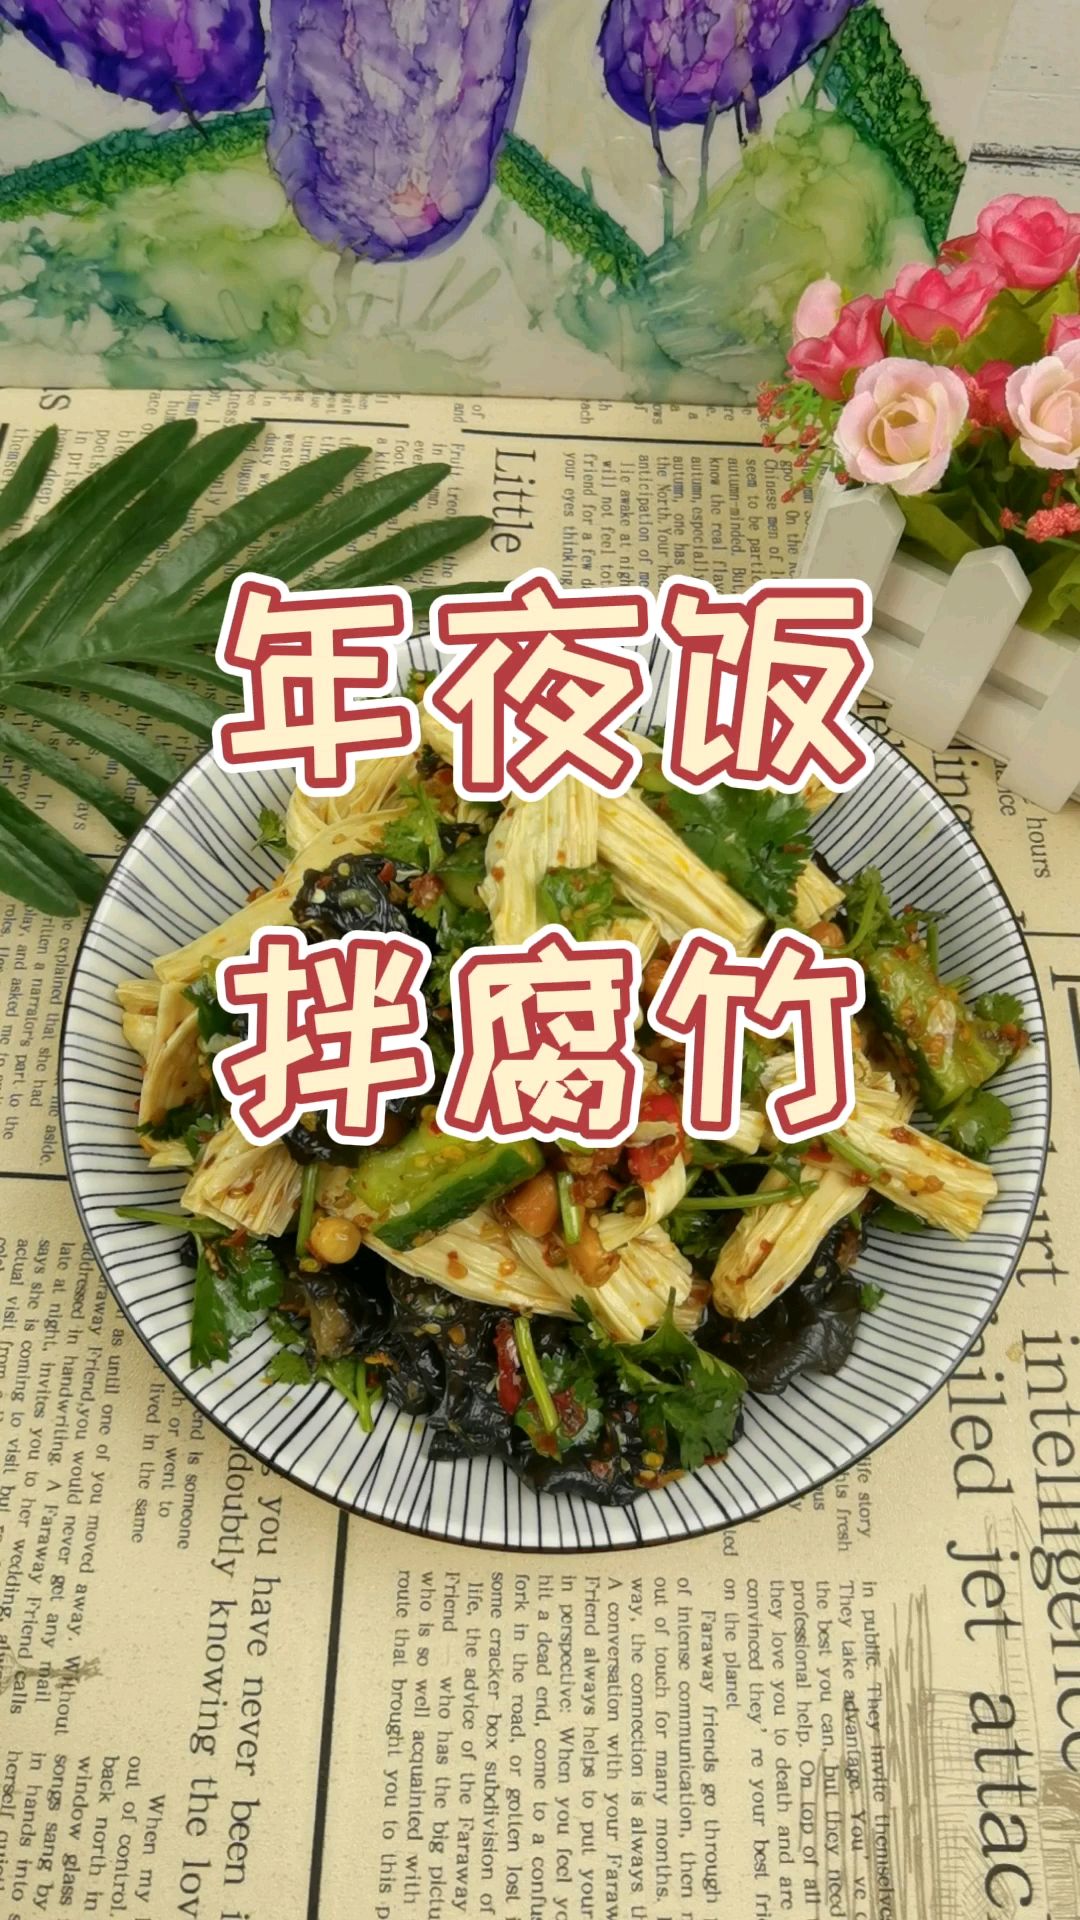 New Year’s Eve Dinner is Also Served with Cold Dishes-mixed with Yuba, New Year Banquet Guests Eat Rot recipe